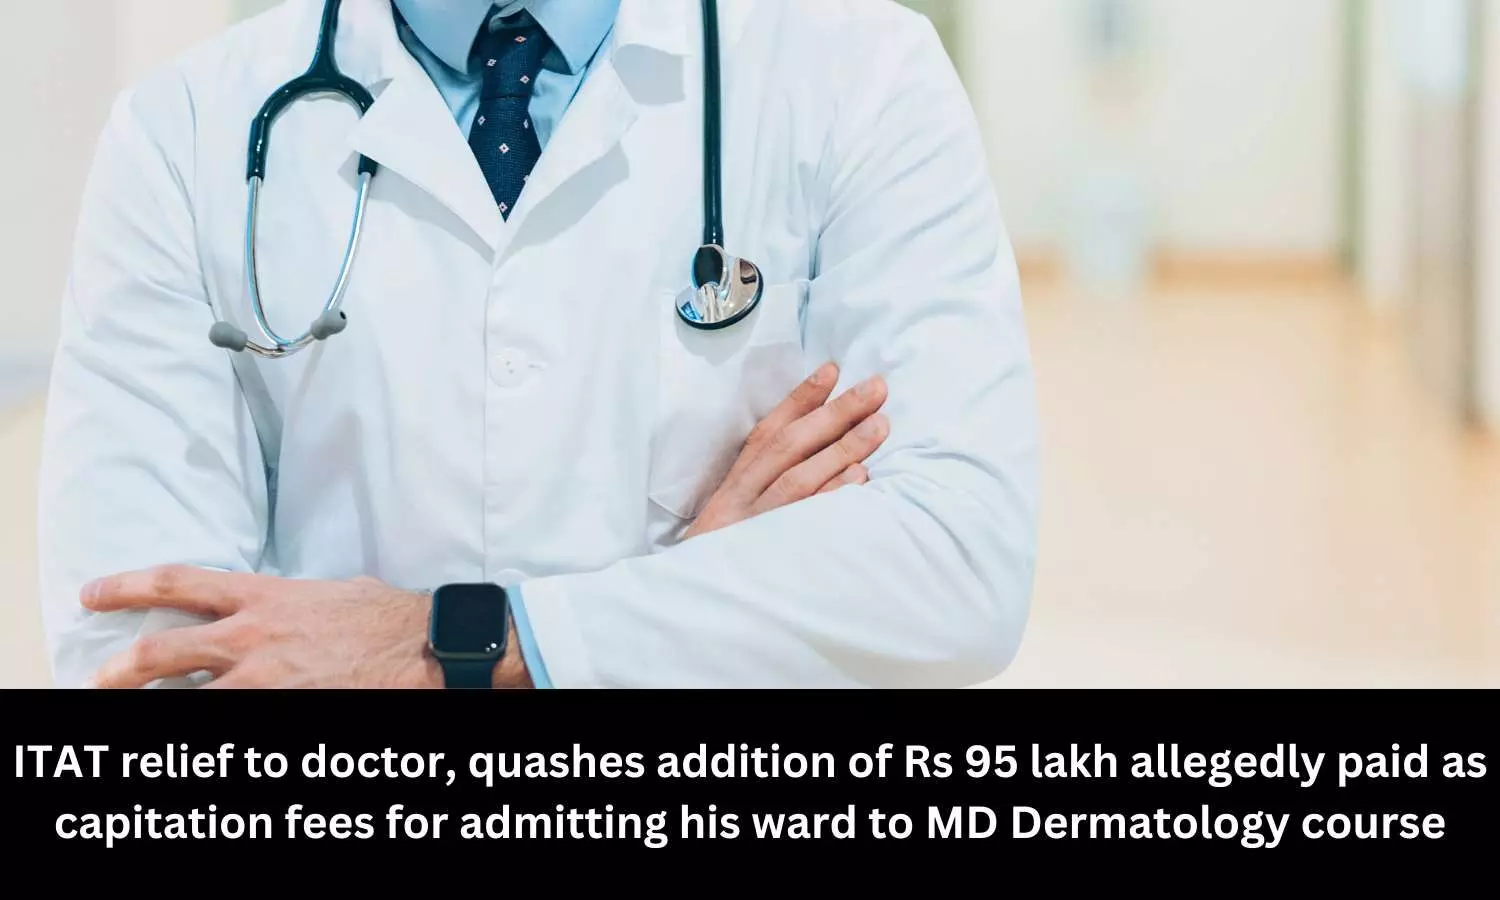 ITAT relief to doctor, quashes addition of Rs 95 lakh allegedly paid as capitation fees for admitting his ward to MD Dermatology course